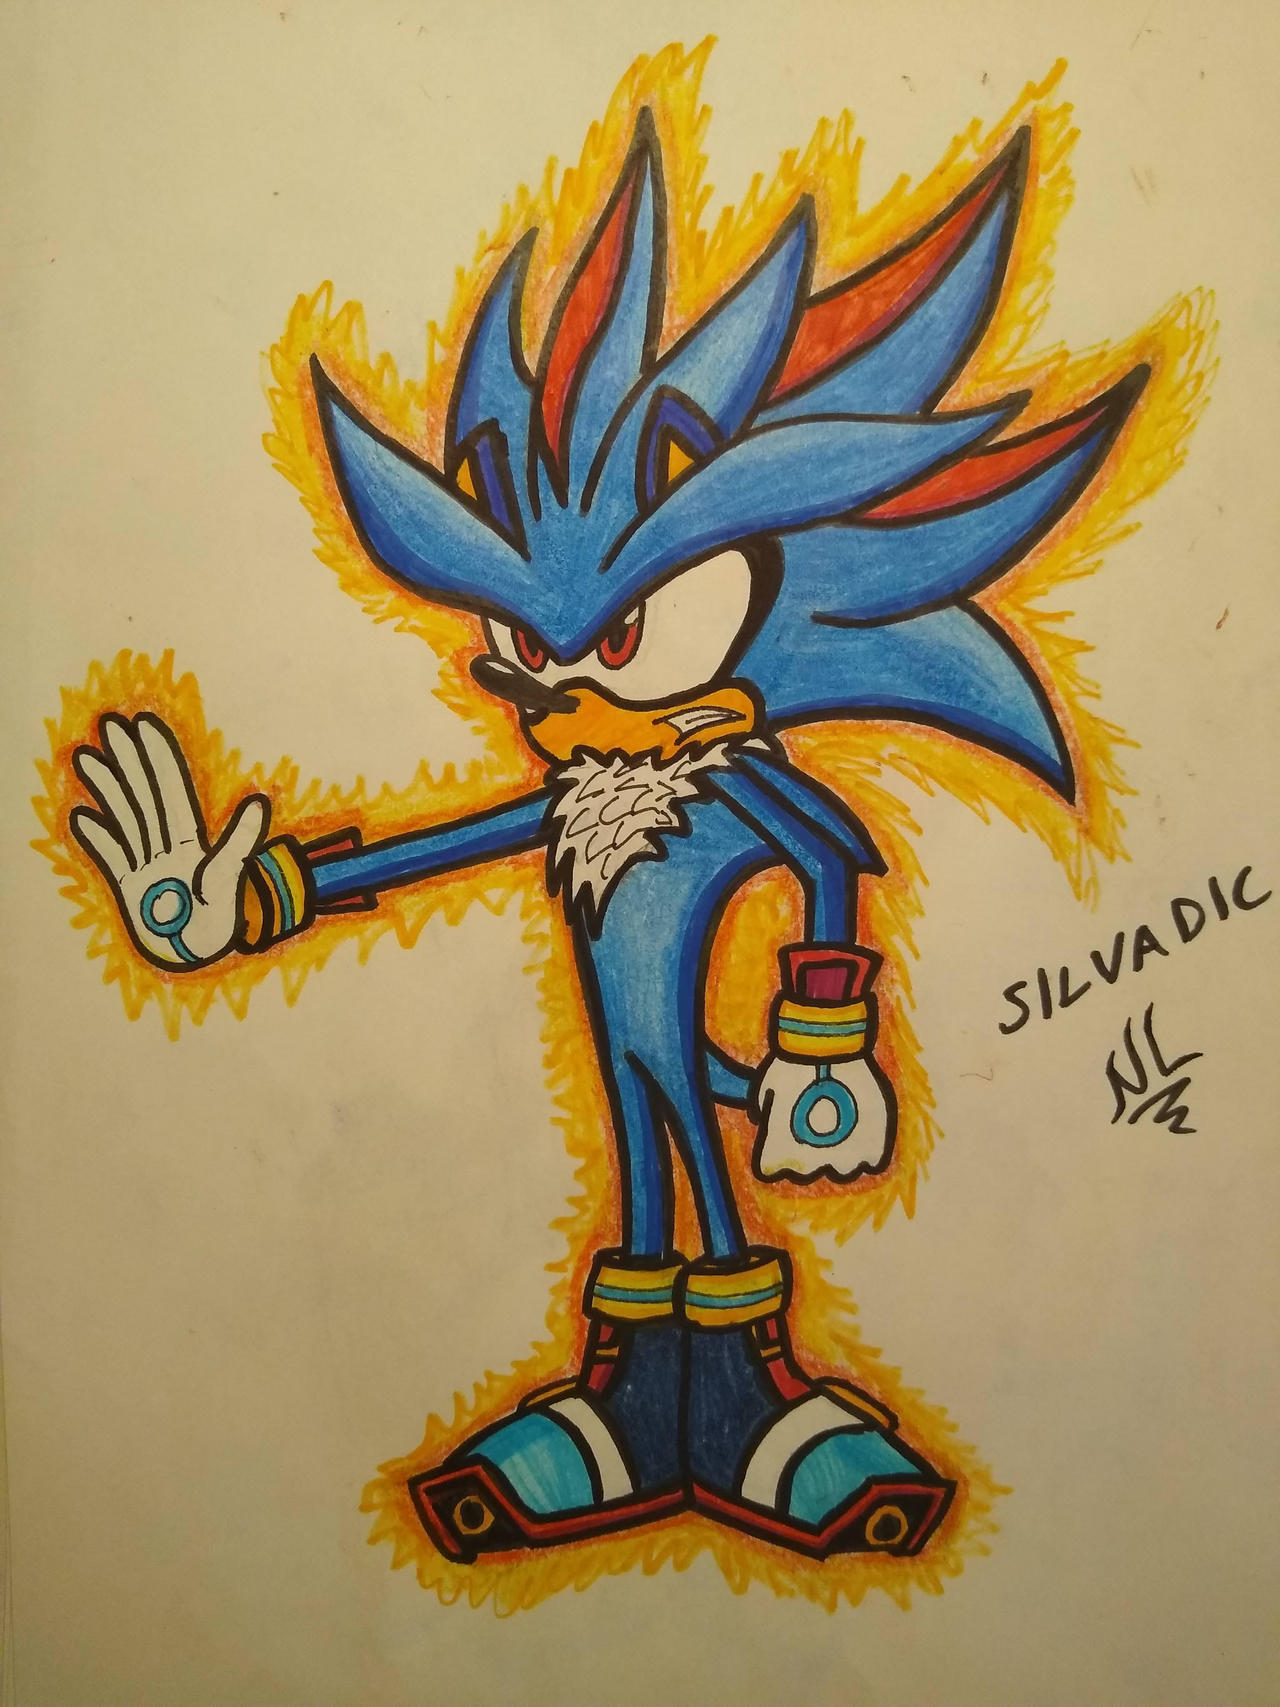 Sonic,silver and shadow fusion by abdullah02016 on DeviantArt